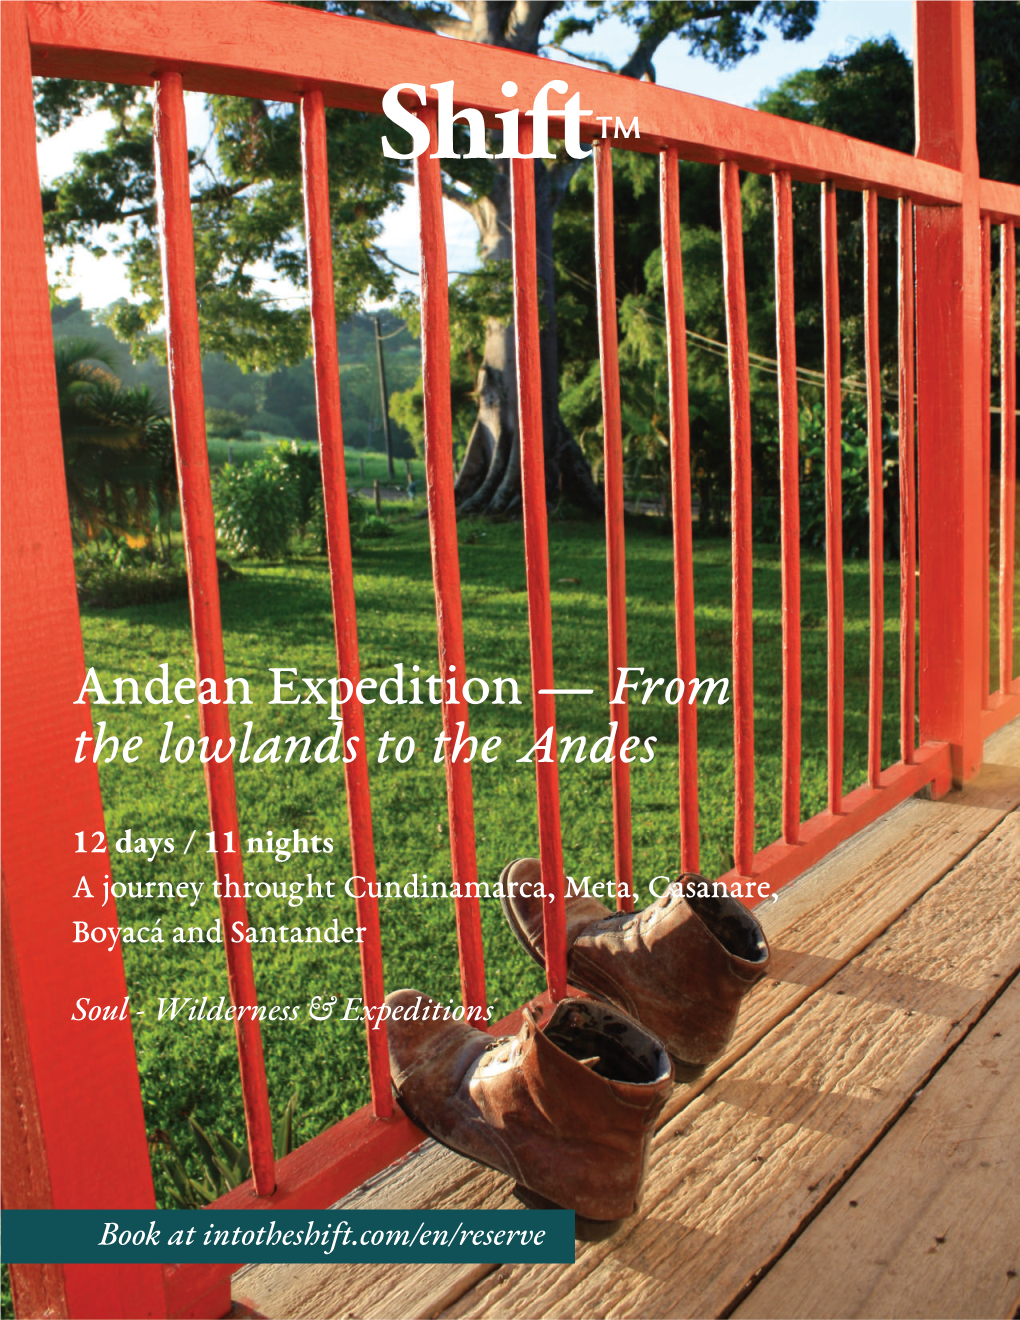 Andean Expedition — from the Lowlands to the Andes